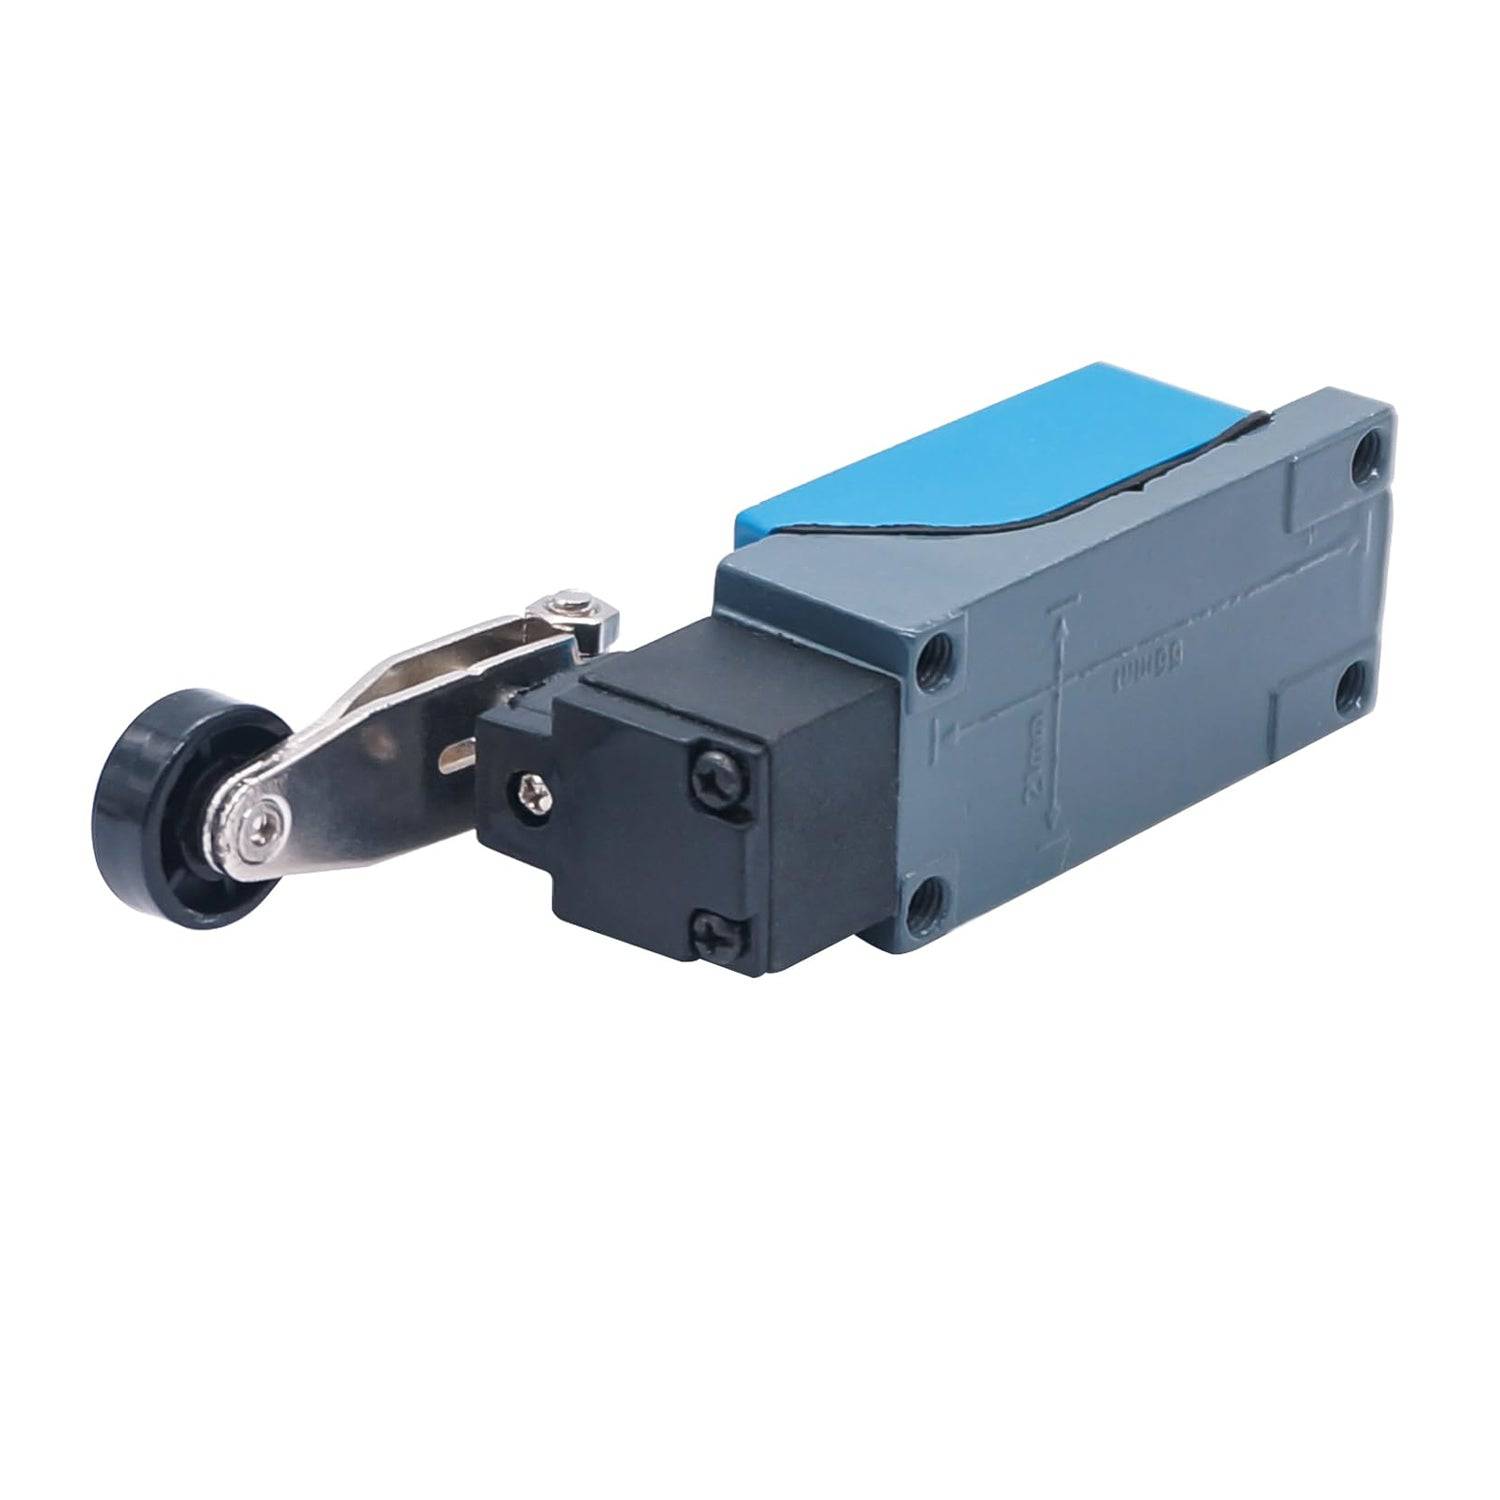 ME-8104 Rotary Limit Switch Adjustable Roller